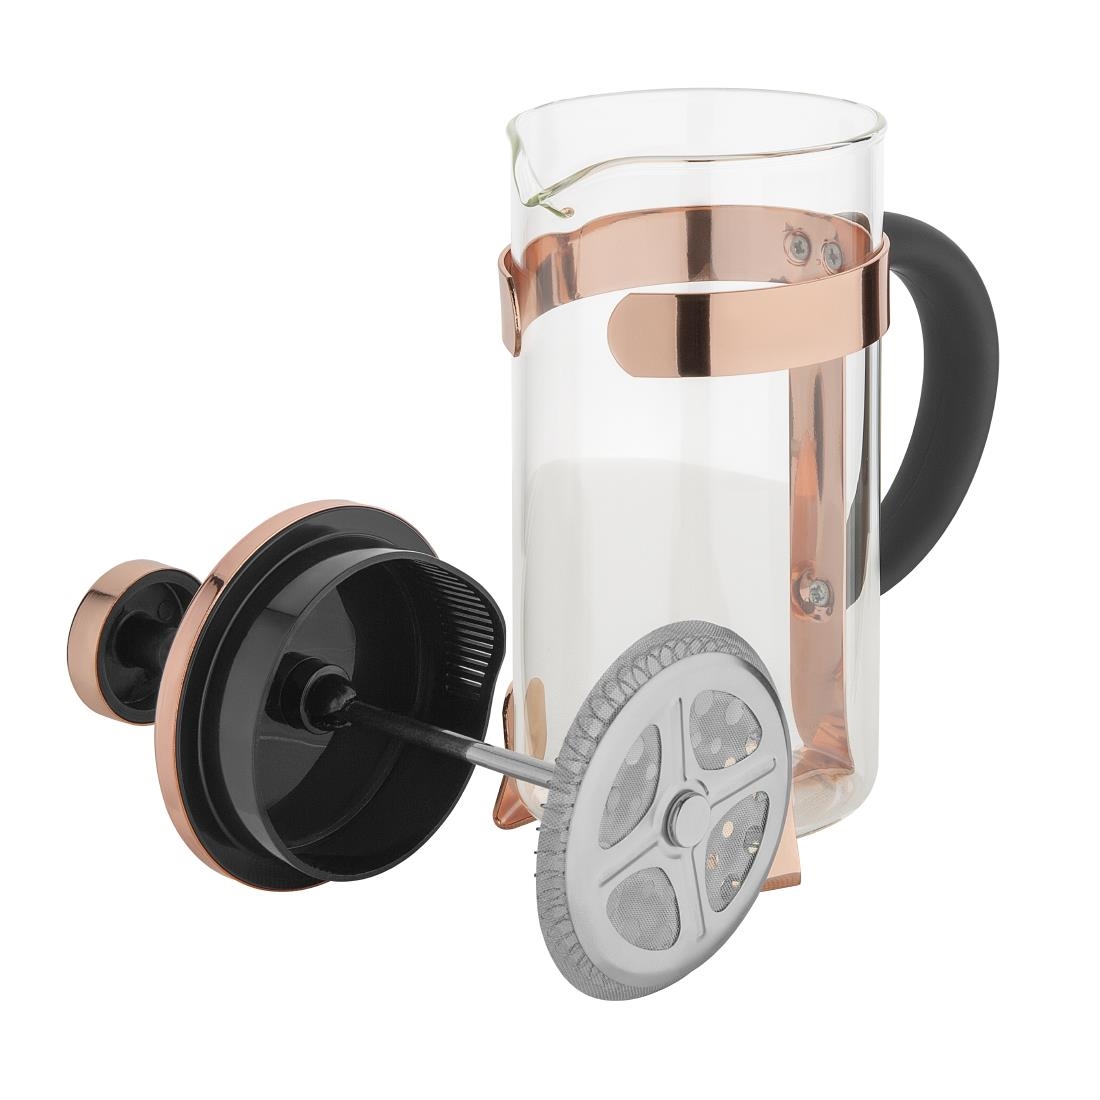 Olympia Contemporary Cafetiere Copper 3 Cup (DR745)